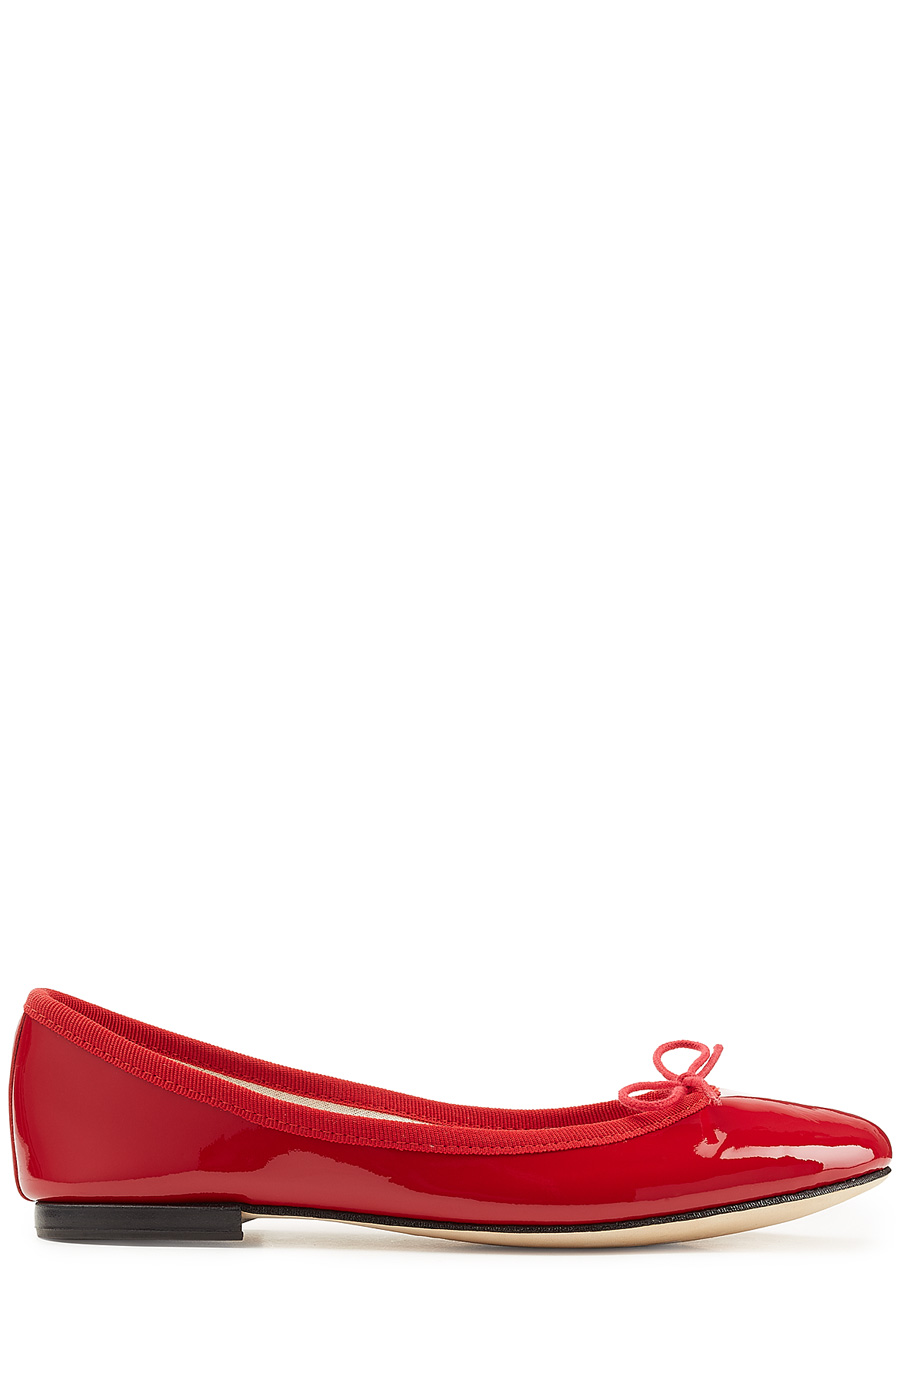 REPETTO The Cendrillon Patent-Leather Ballet Flats in Red | ModeSens